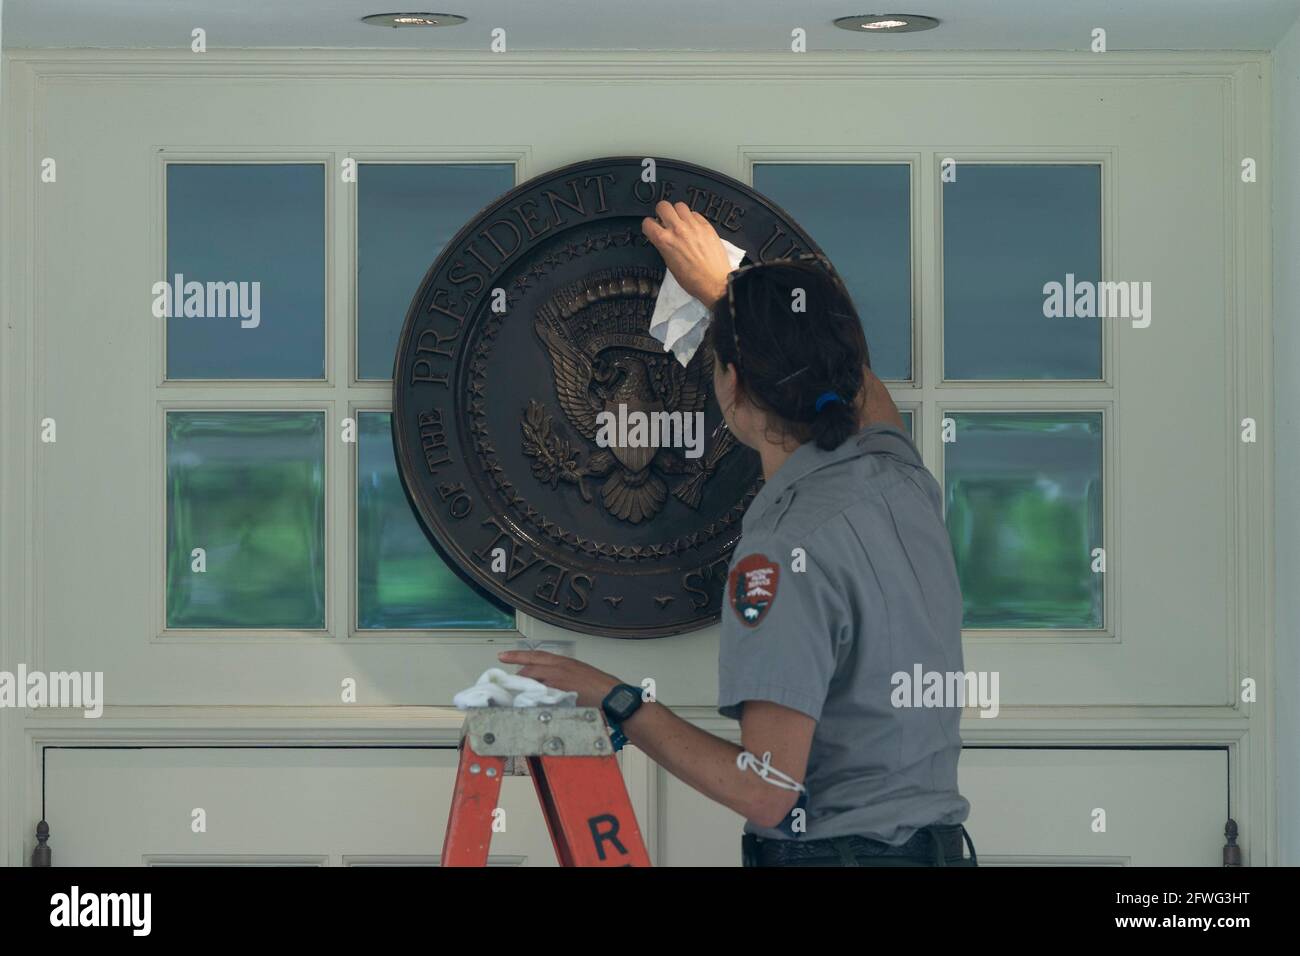 Washington, United States Of America. 22nd May, 2021. A member of the National Park Service cleans the Presidential Seal at the entrance to the West Wing of the White House in Washington, ?DC, May 22, 2021. Credit: Chris Kleponis/Pool/Sipa USA Credit: Sipa USA/Alamy Live News Stock Photo